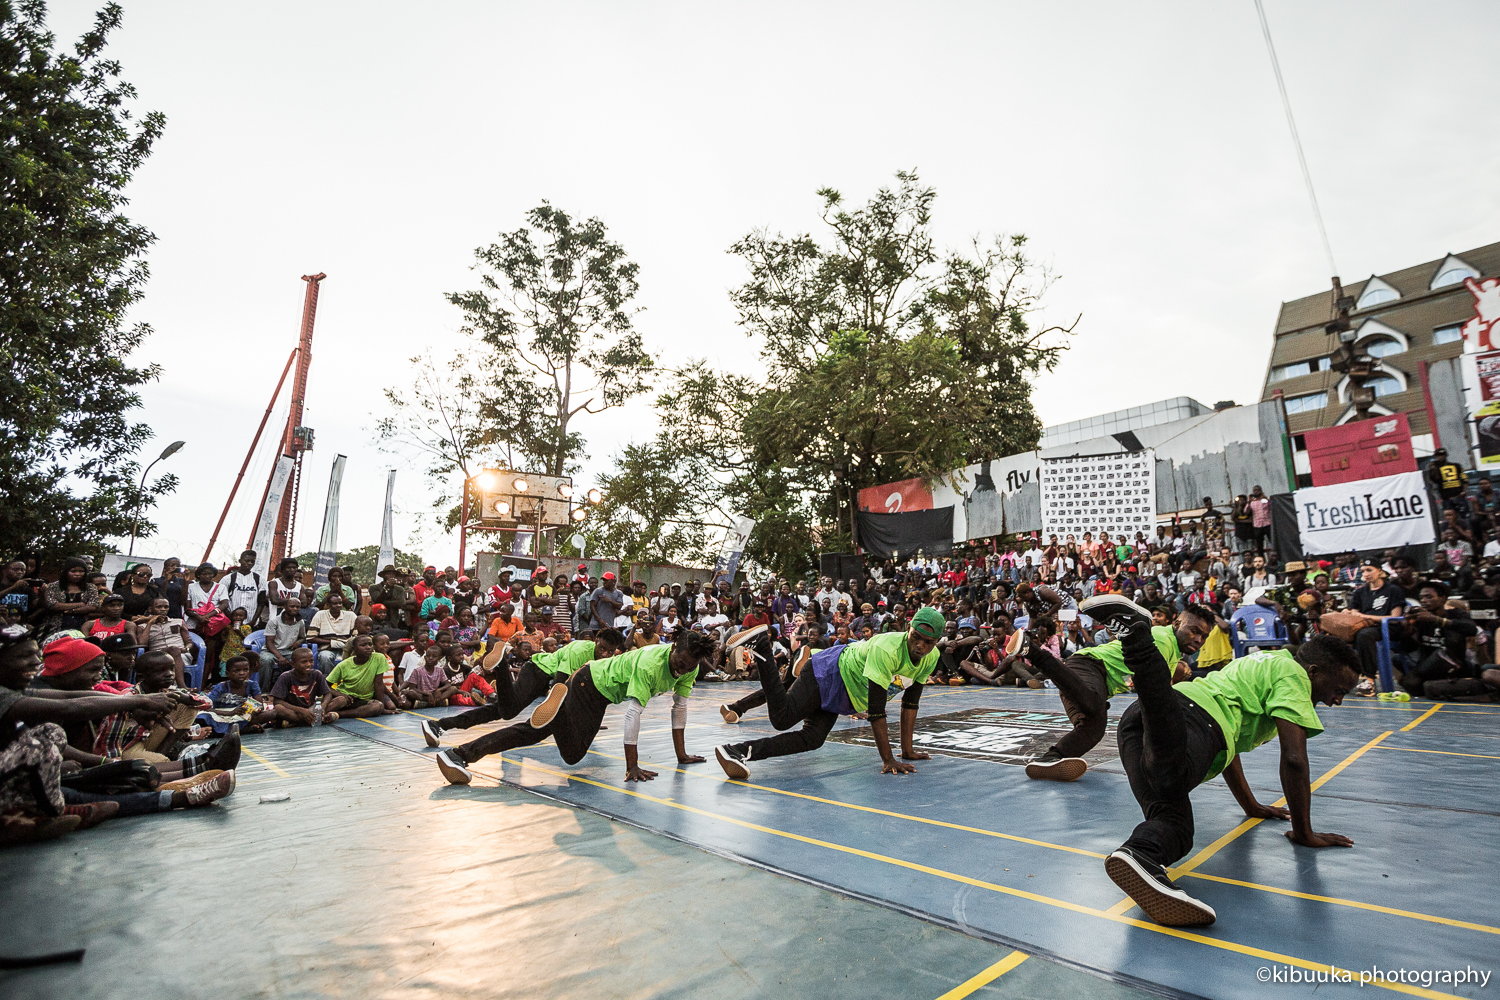 A-crew-from-Tanzania-amazing-performance-at-Breakfastjam-2016-finals-photo